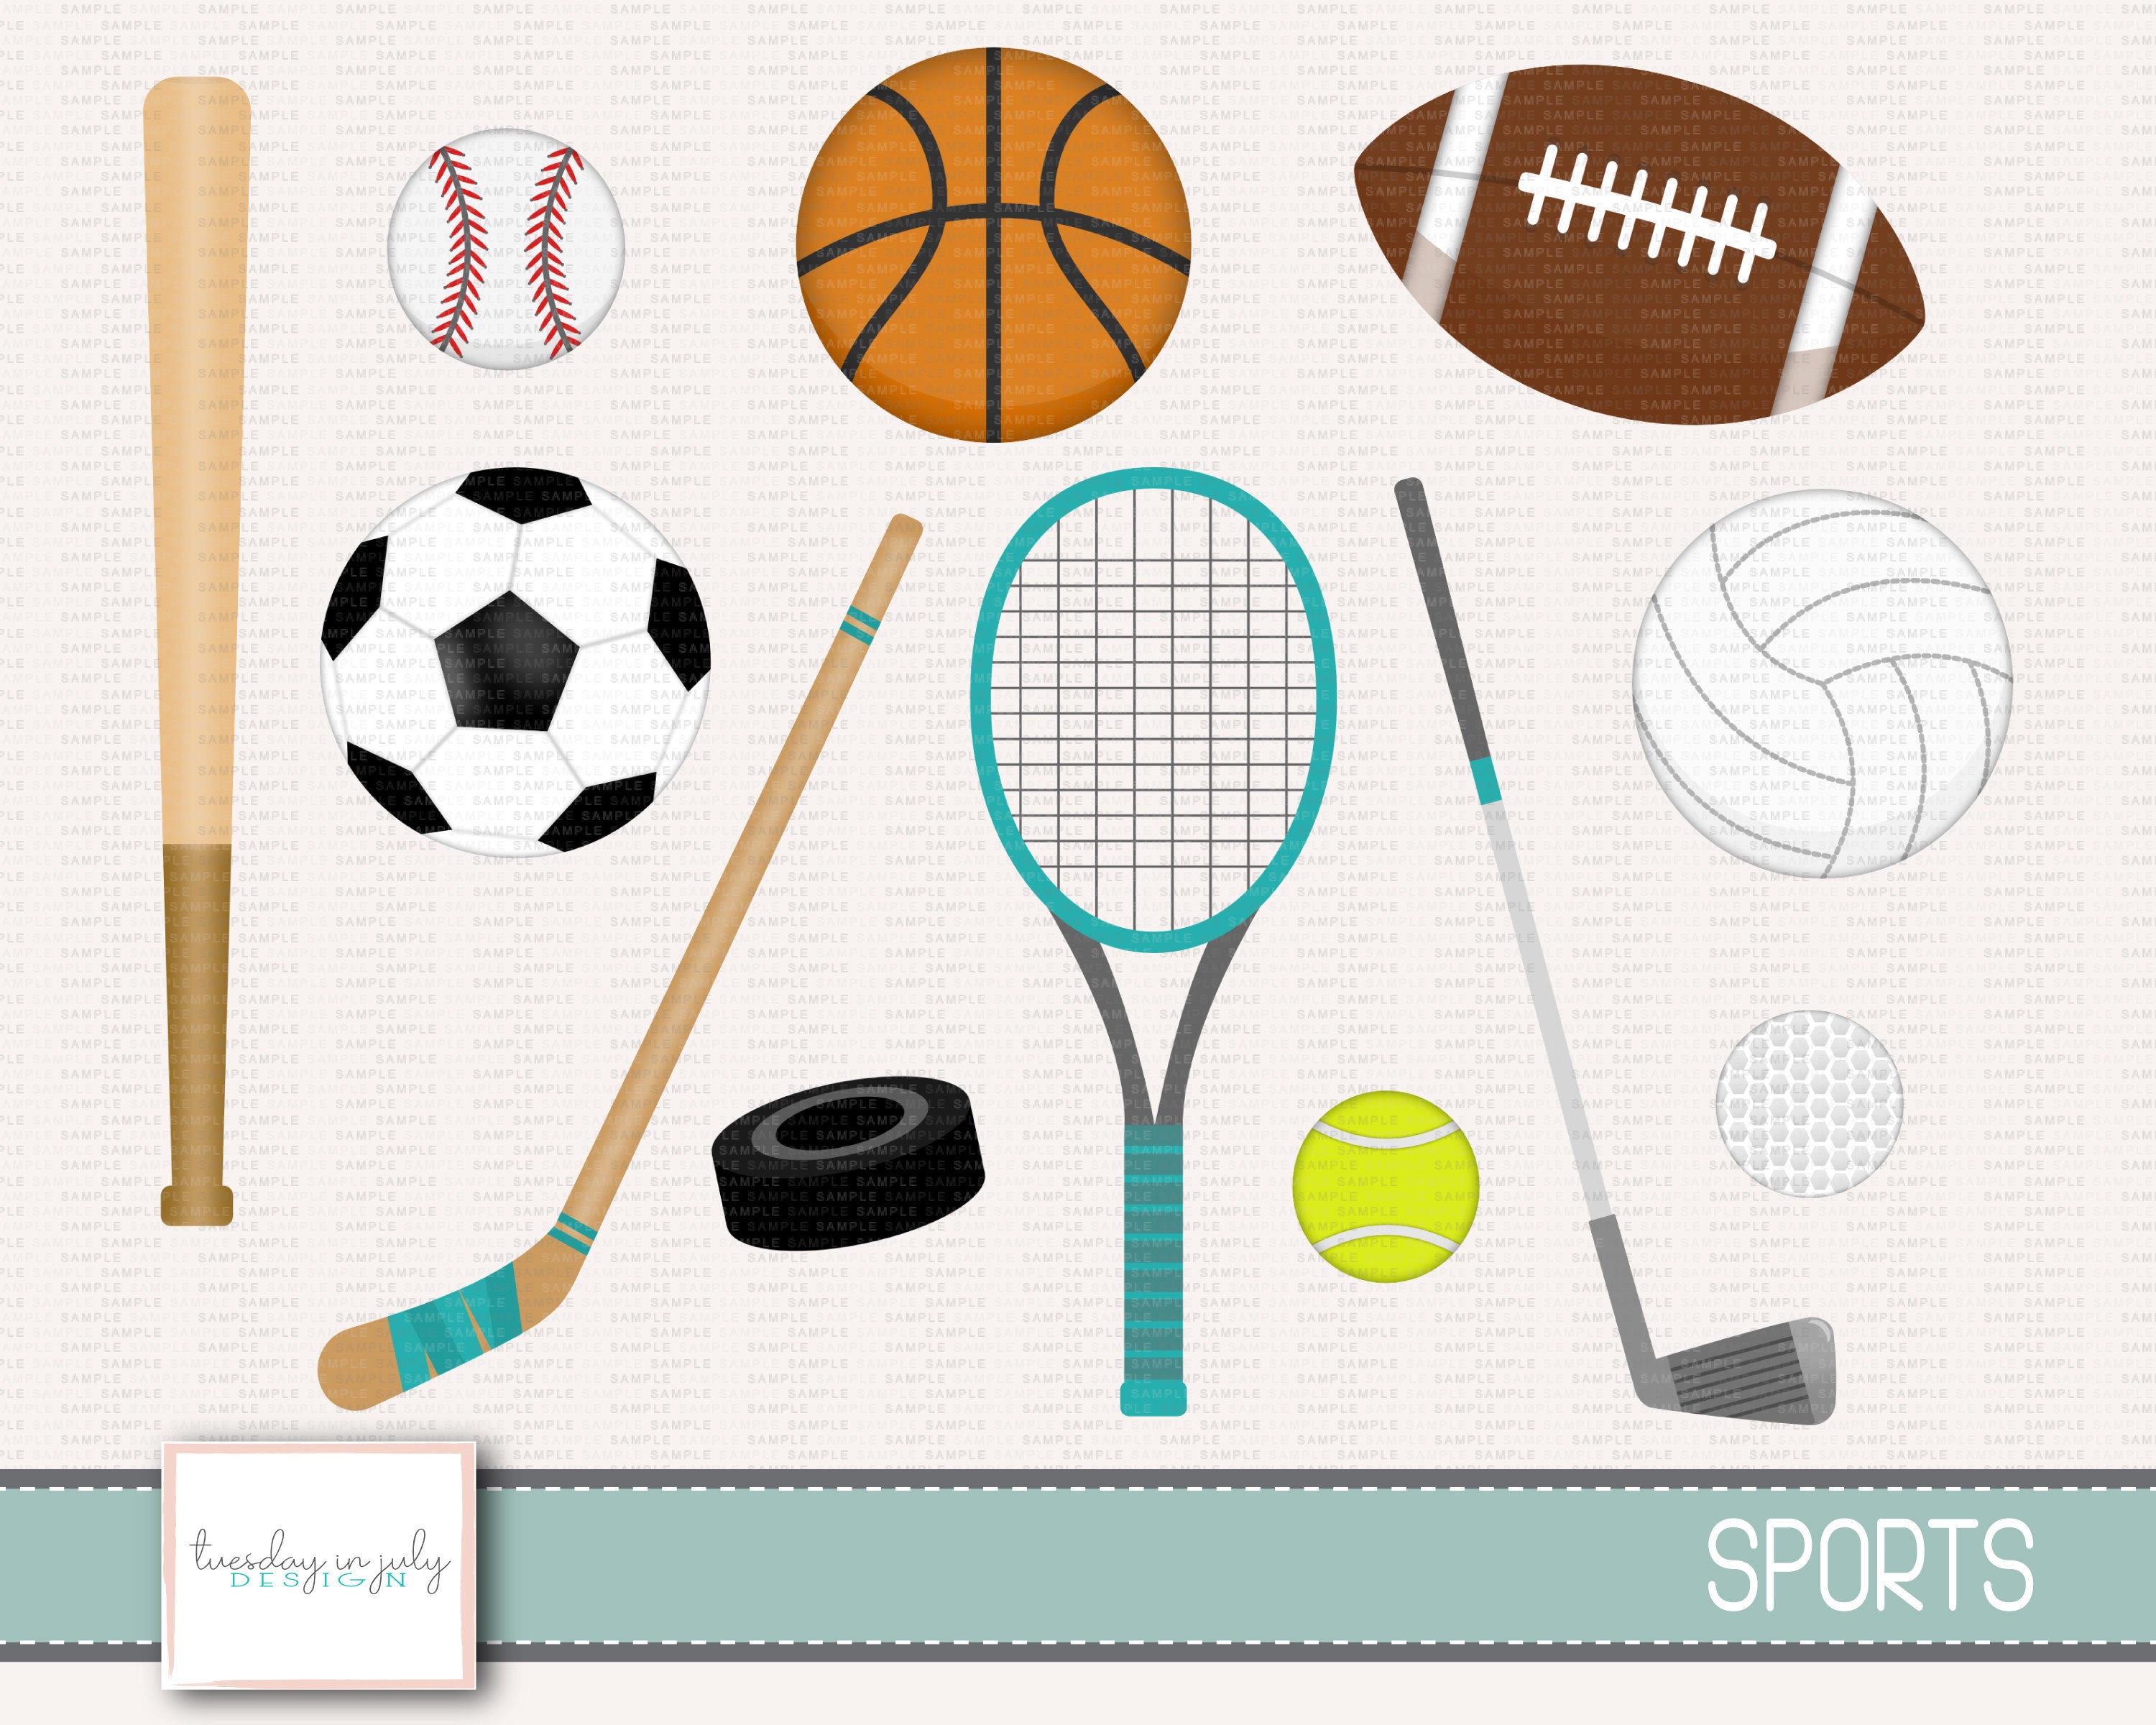 Sports product samples